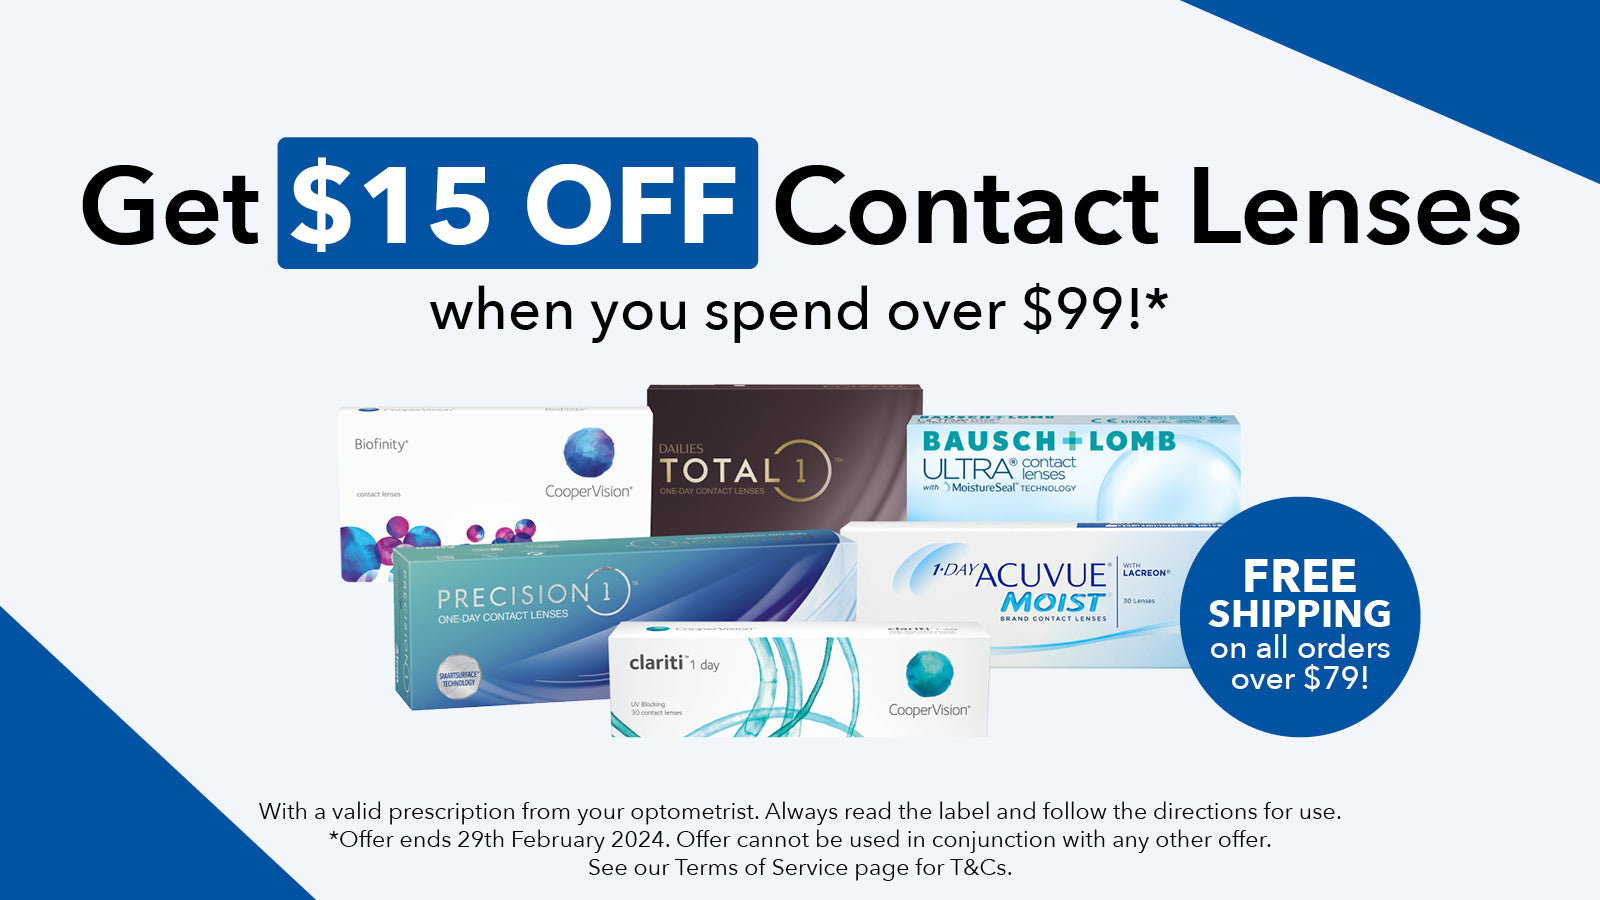 $15 off when you spend over $99 on contact lenses